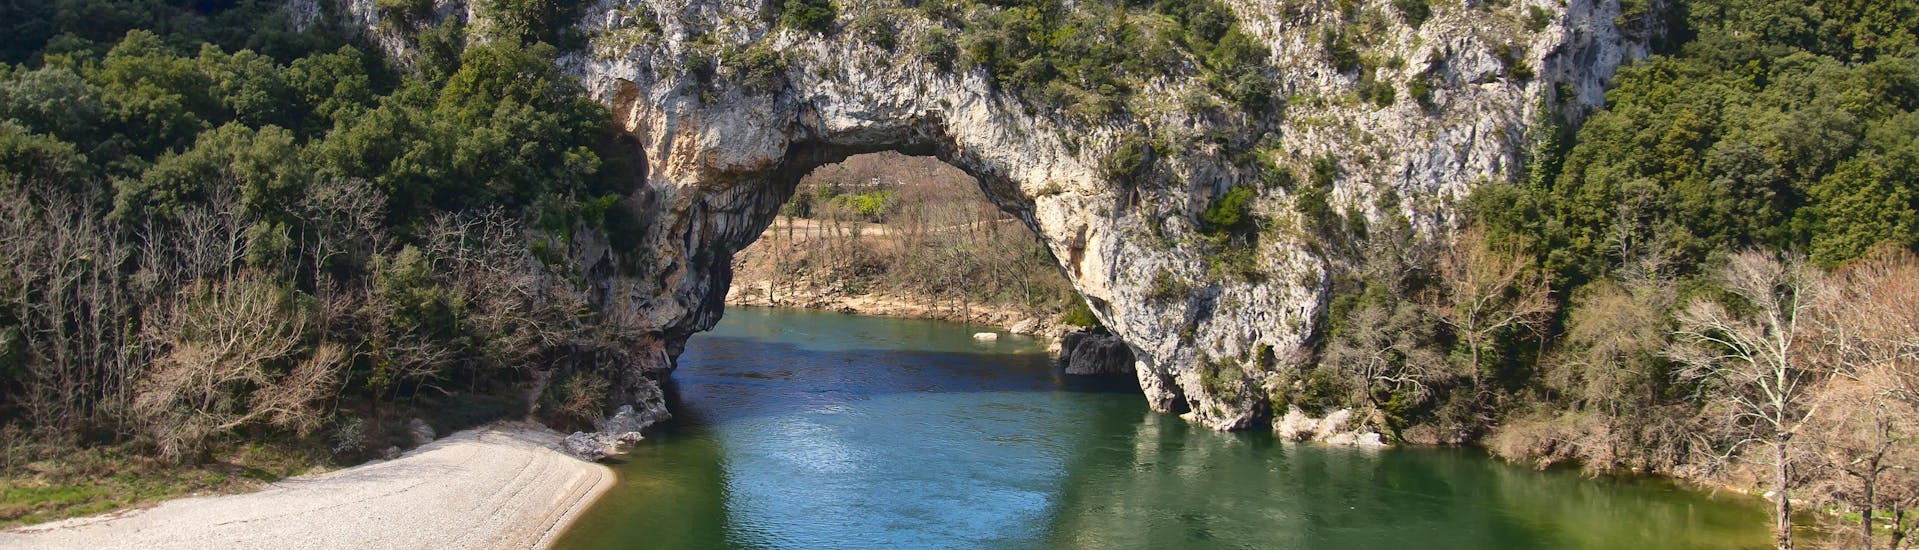 An image of the famous rock arch that can be admired by those who go canyoning in Vallon-Pont-d'Arc.